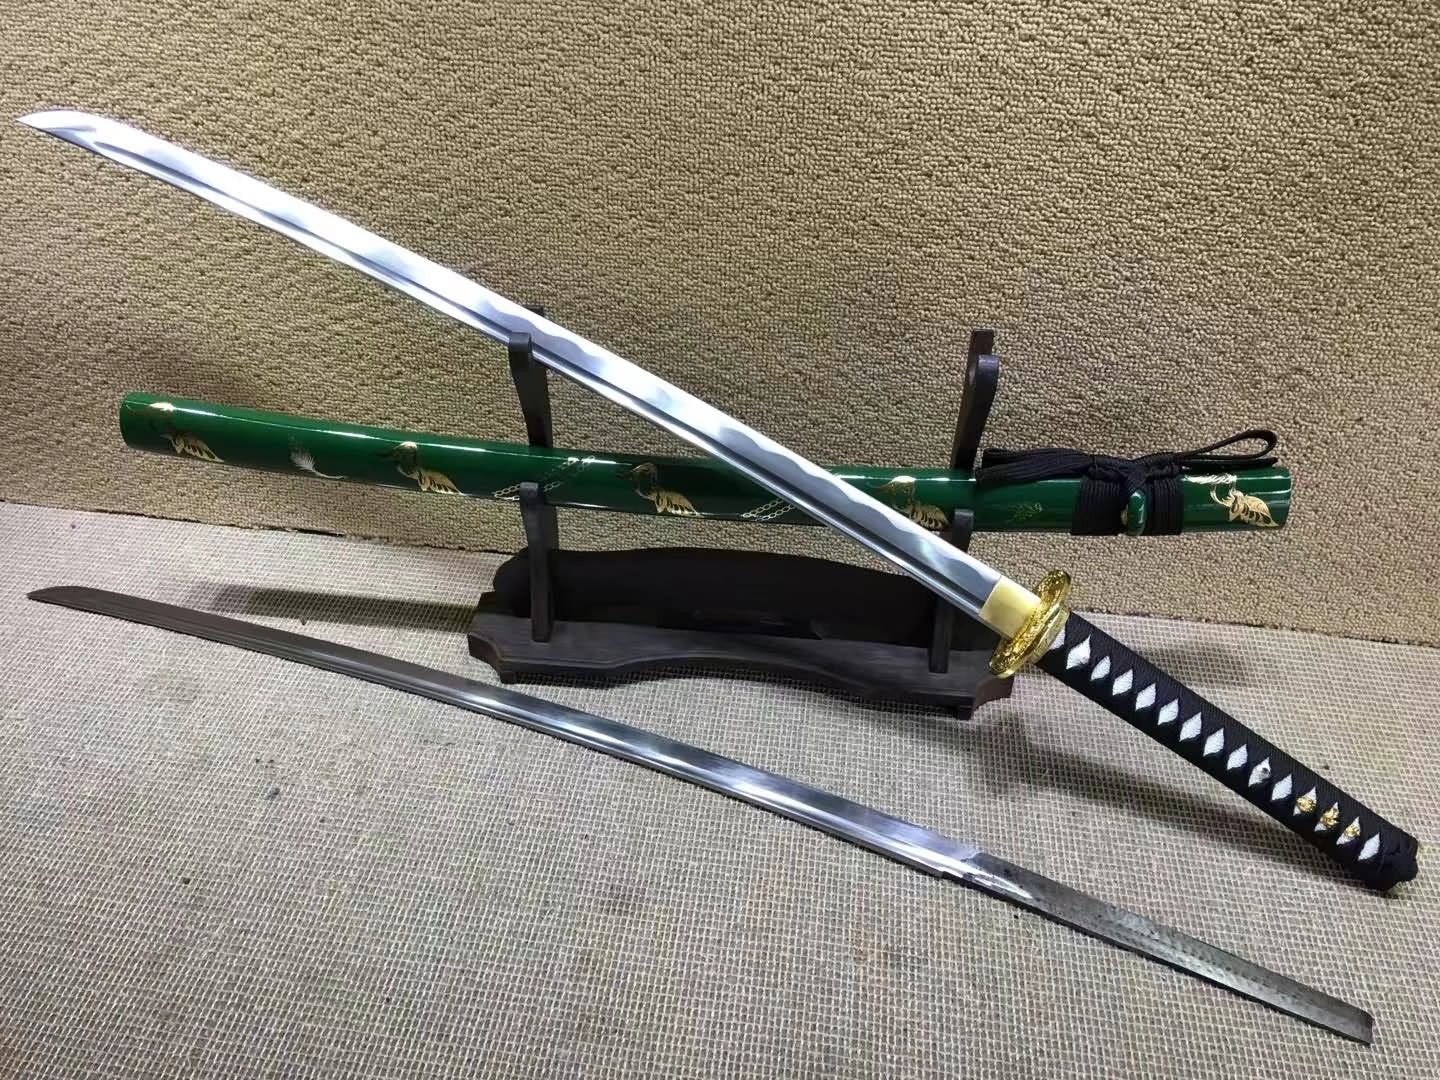 Samurai sword,Medium carbon steel,Green scabbard,Alloy fitted,Length 39 inch - Chinese sword shop